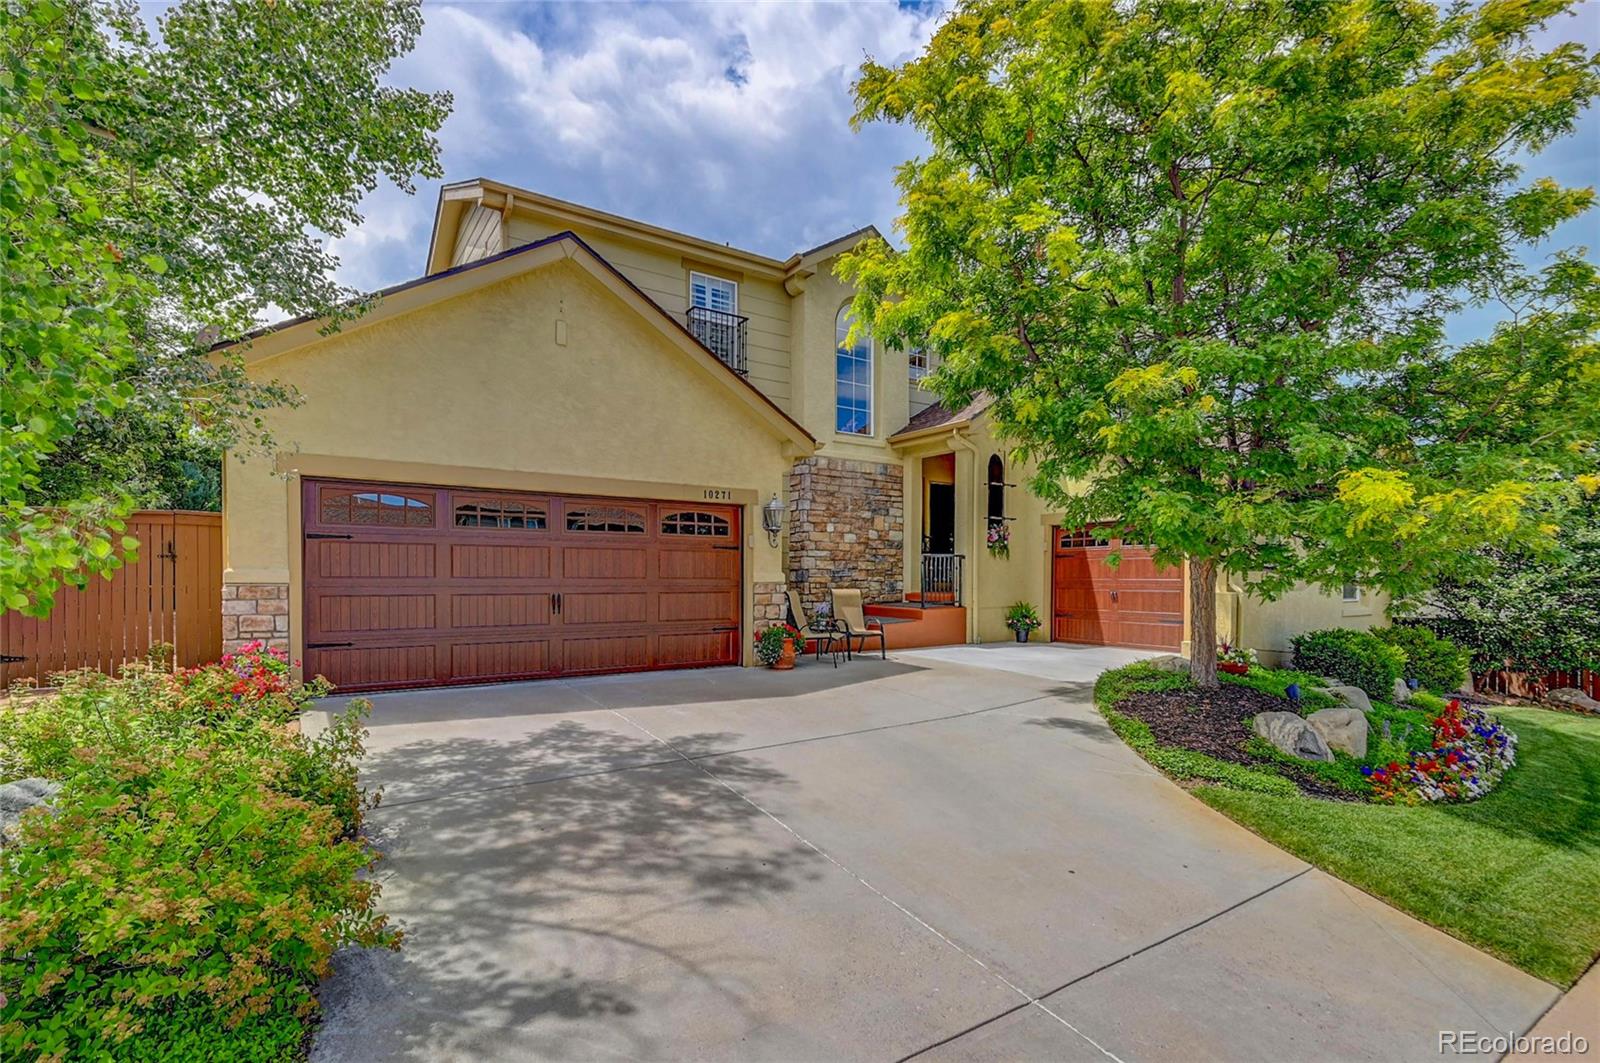 10271  greatwood pointe , highlands ranch sold home. Closed on 2024-03-18 for $1,000,000.